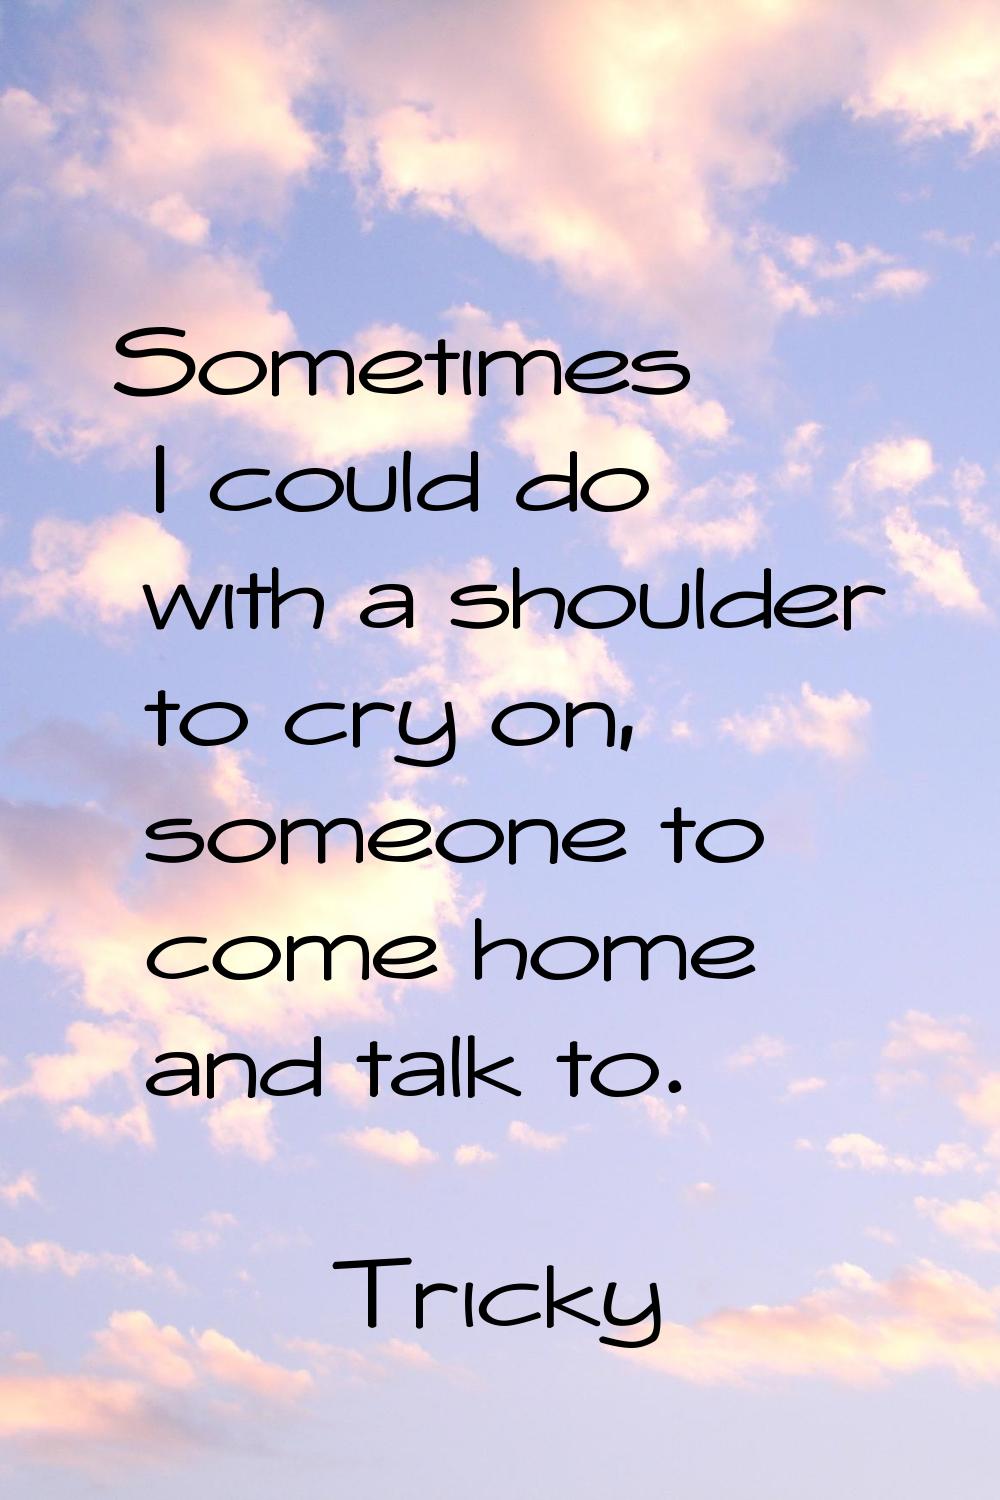 Sometimes I could do with a shoulder to cry on, someone to come home and talk to.